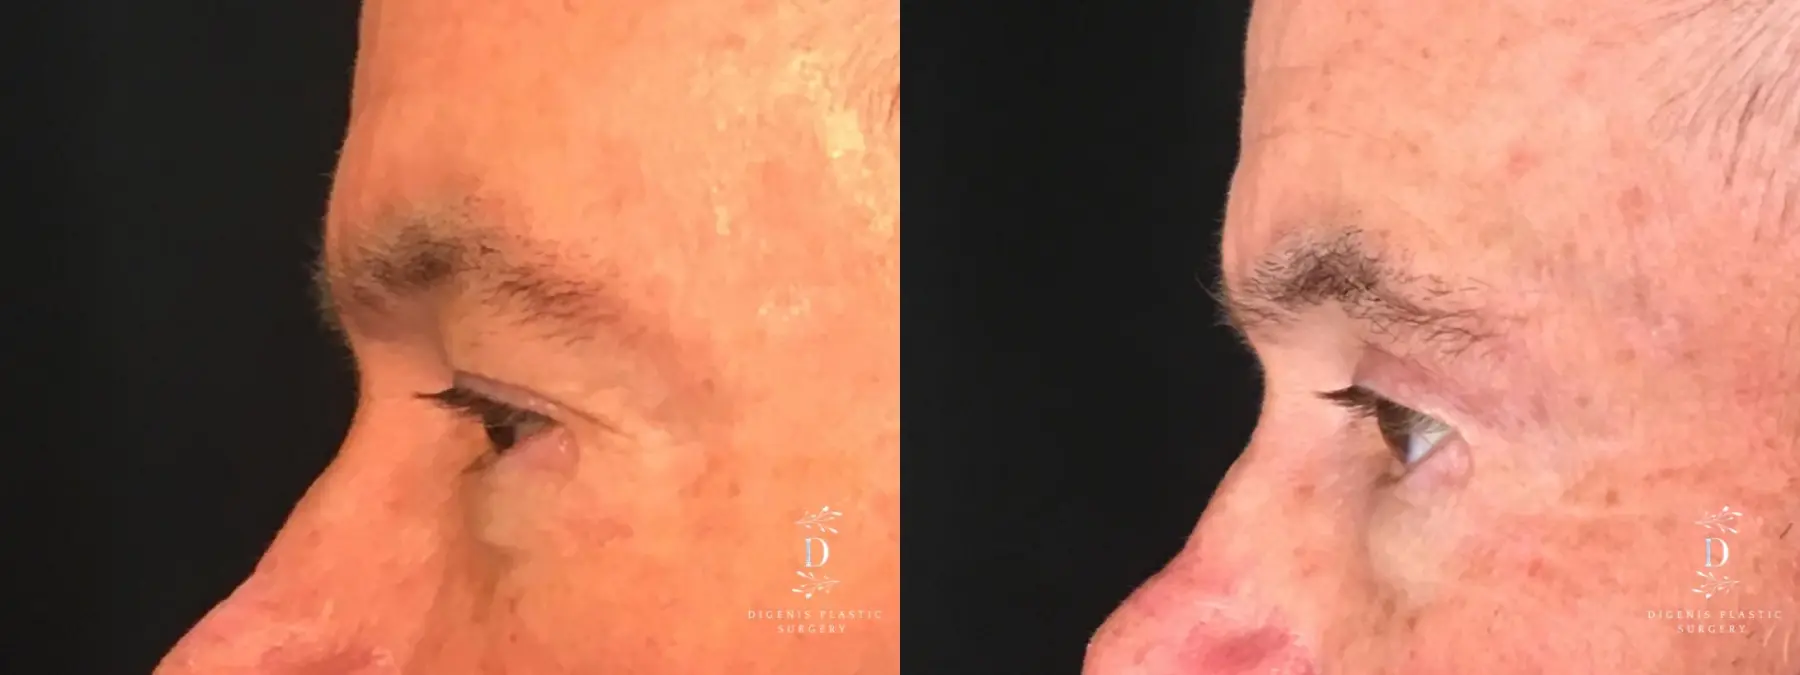 Eyelid Surgery: Patient 19 - Before and After 5